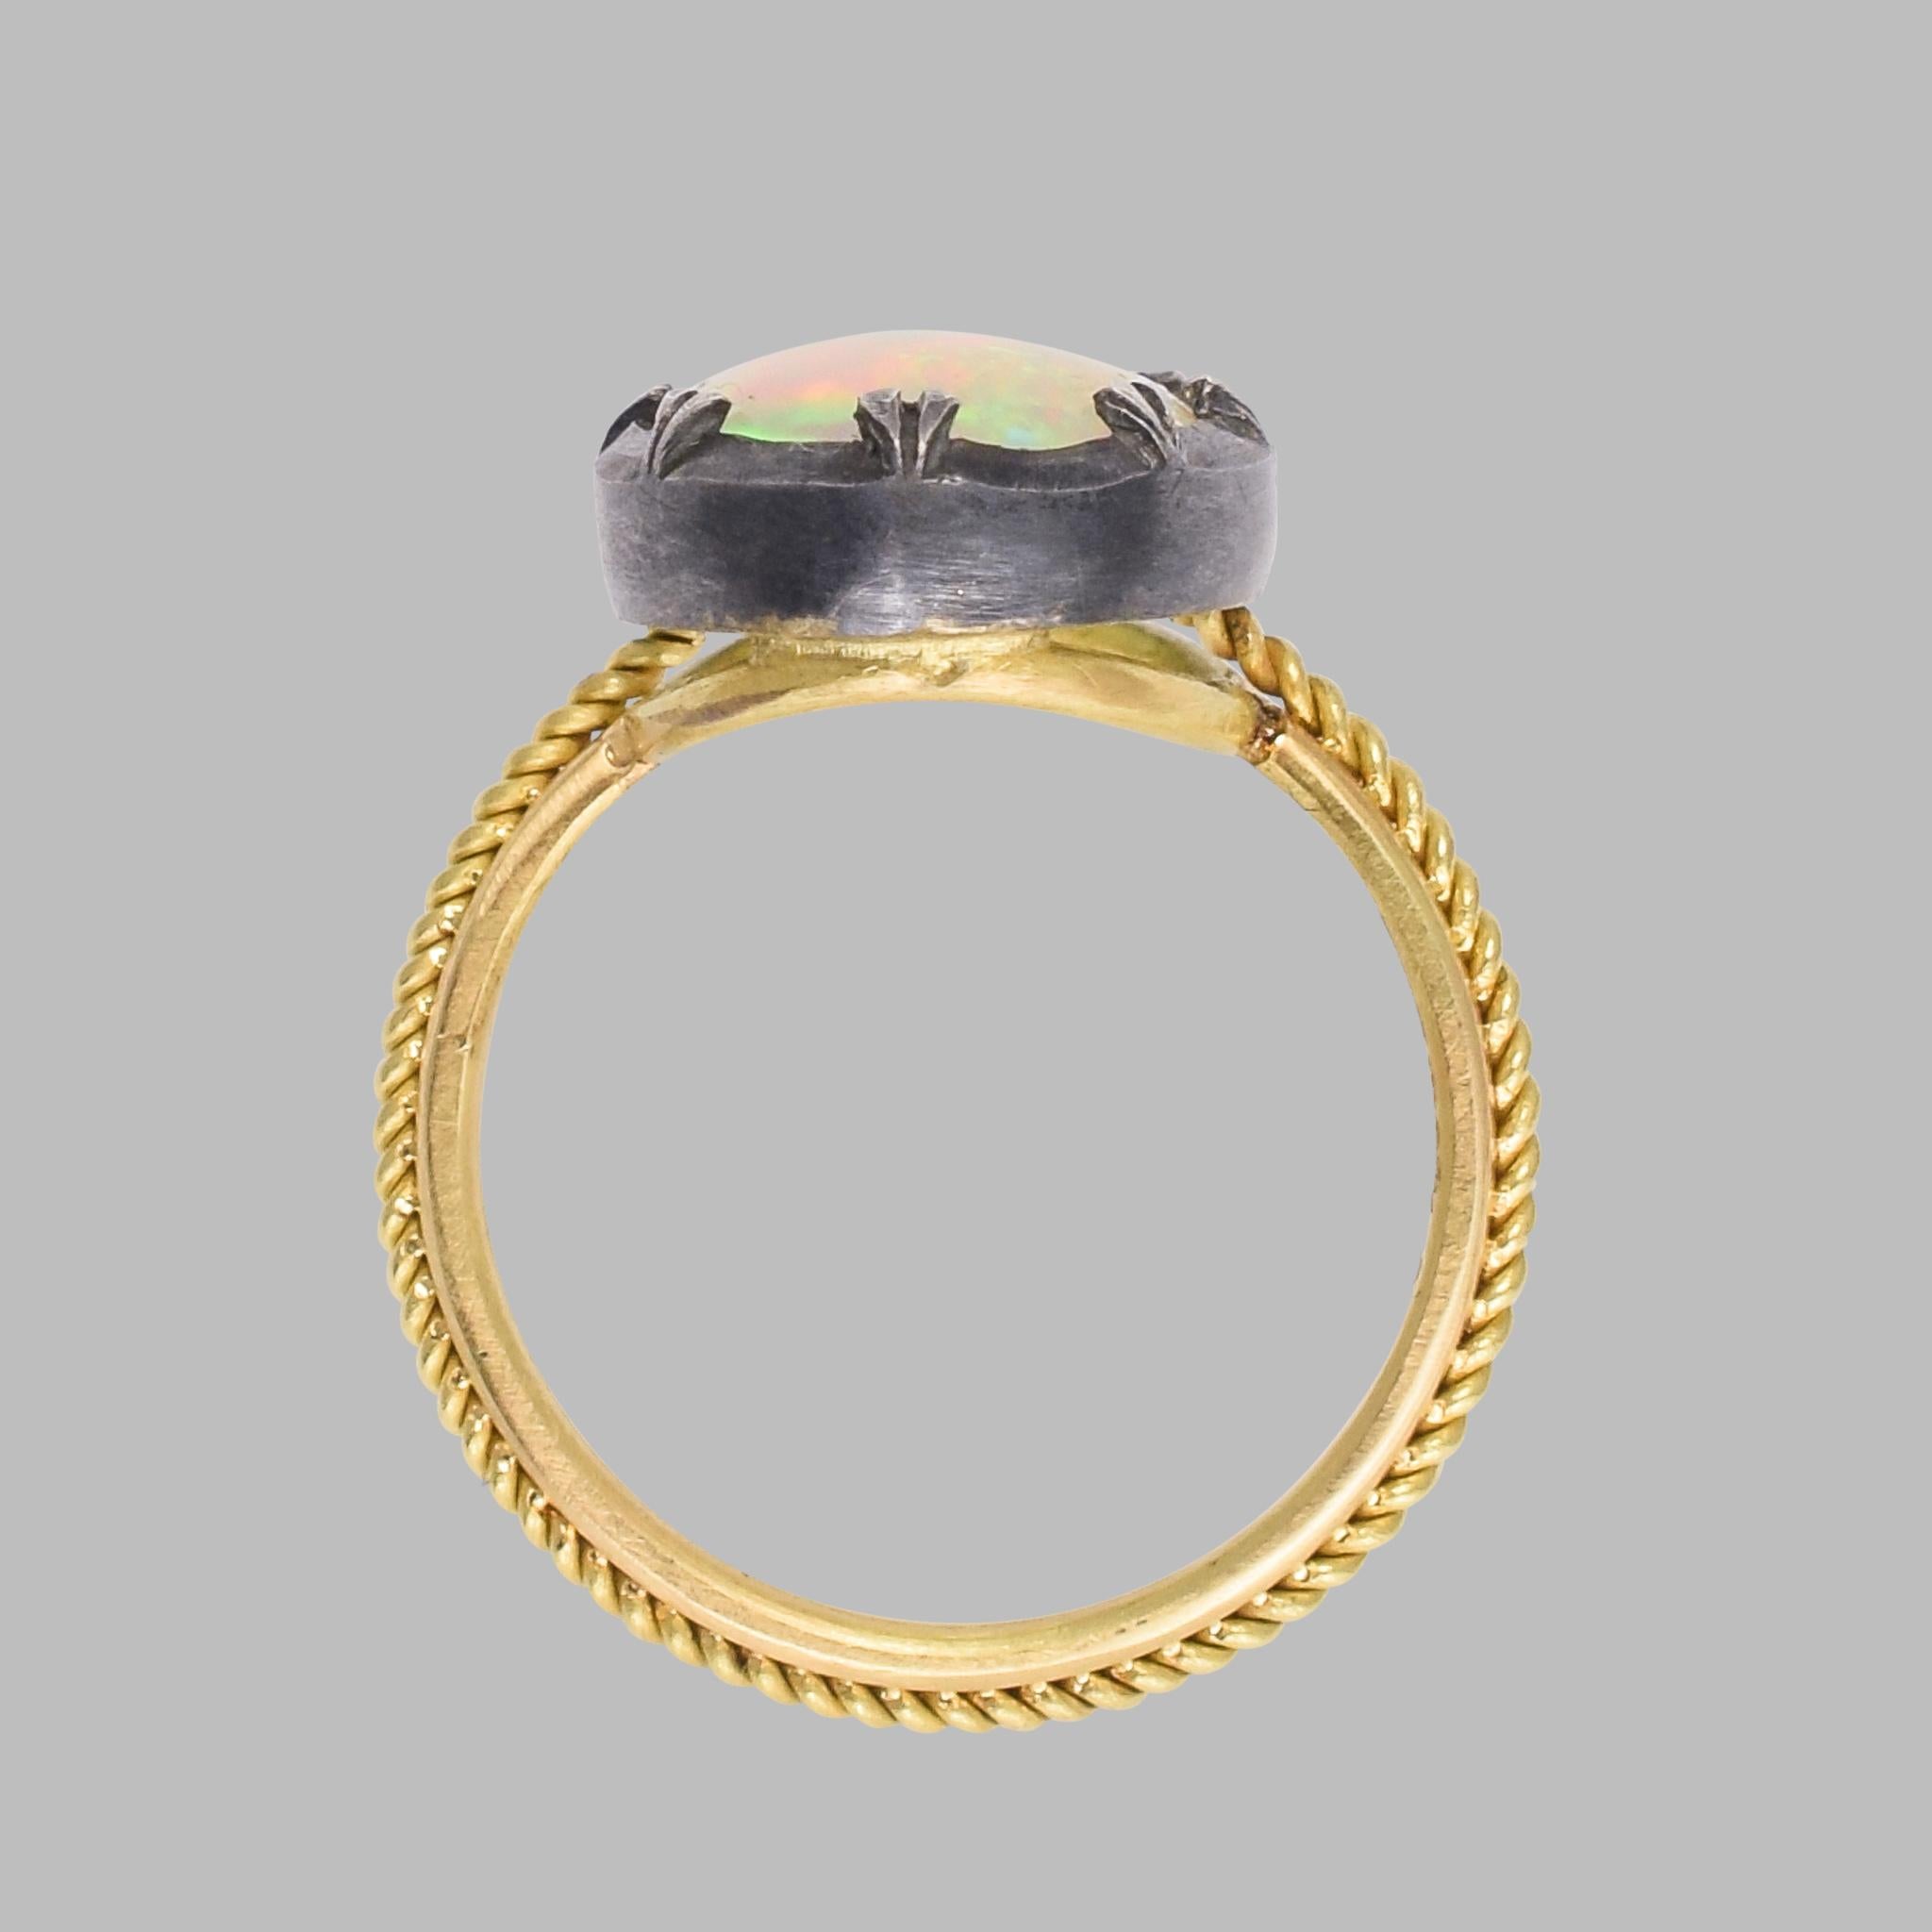 Georgian BL Bespoke Magna Opalus Solitaire Ring For Sale